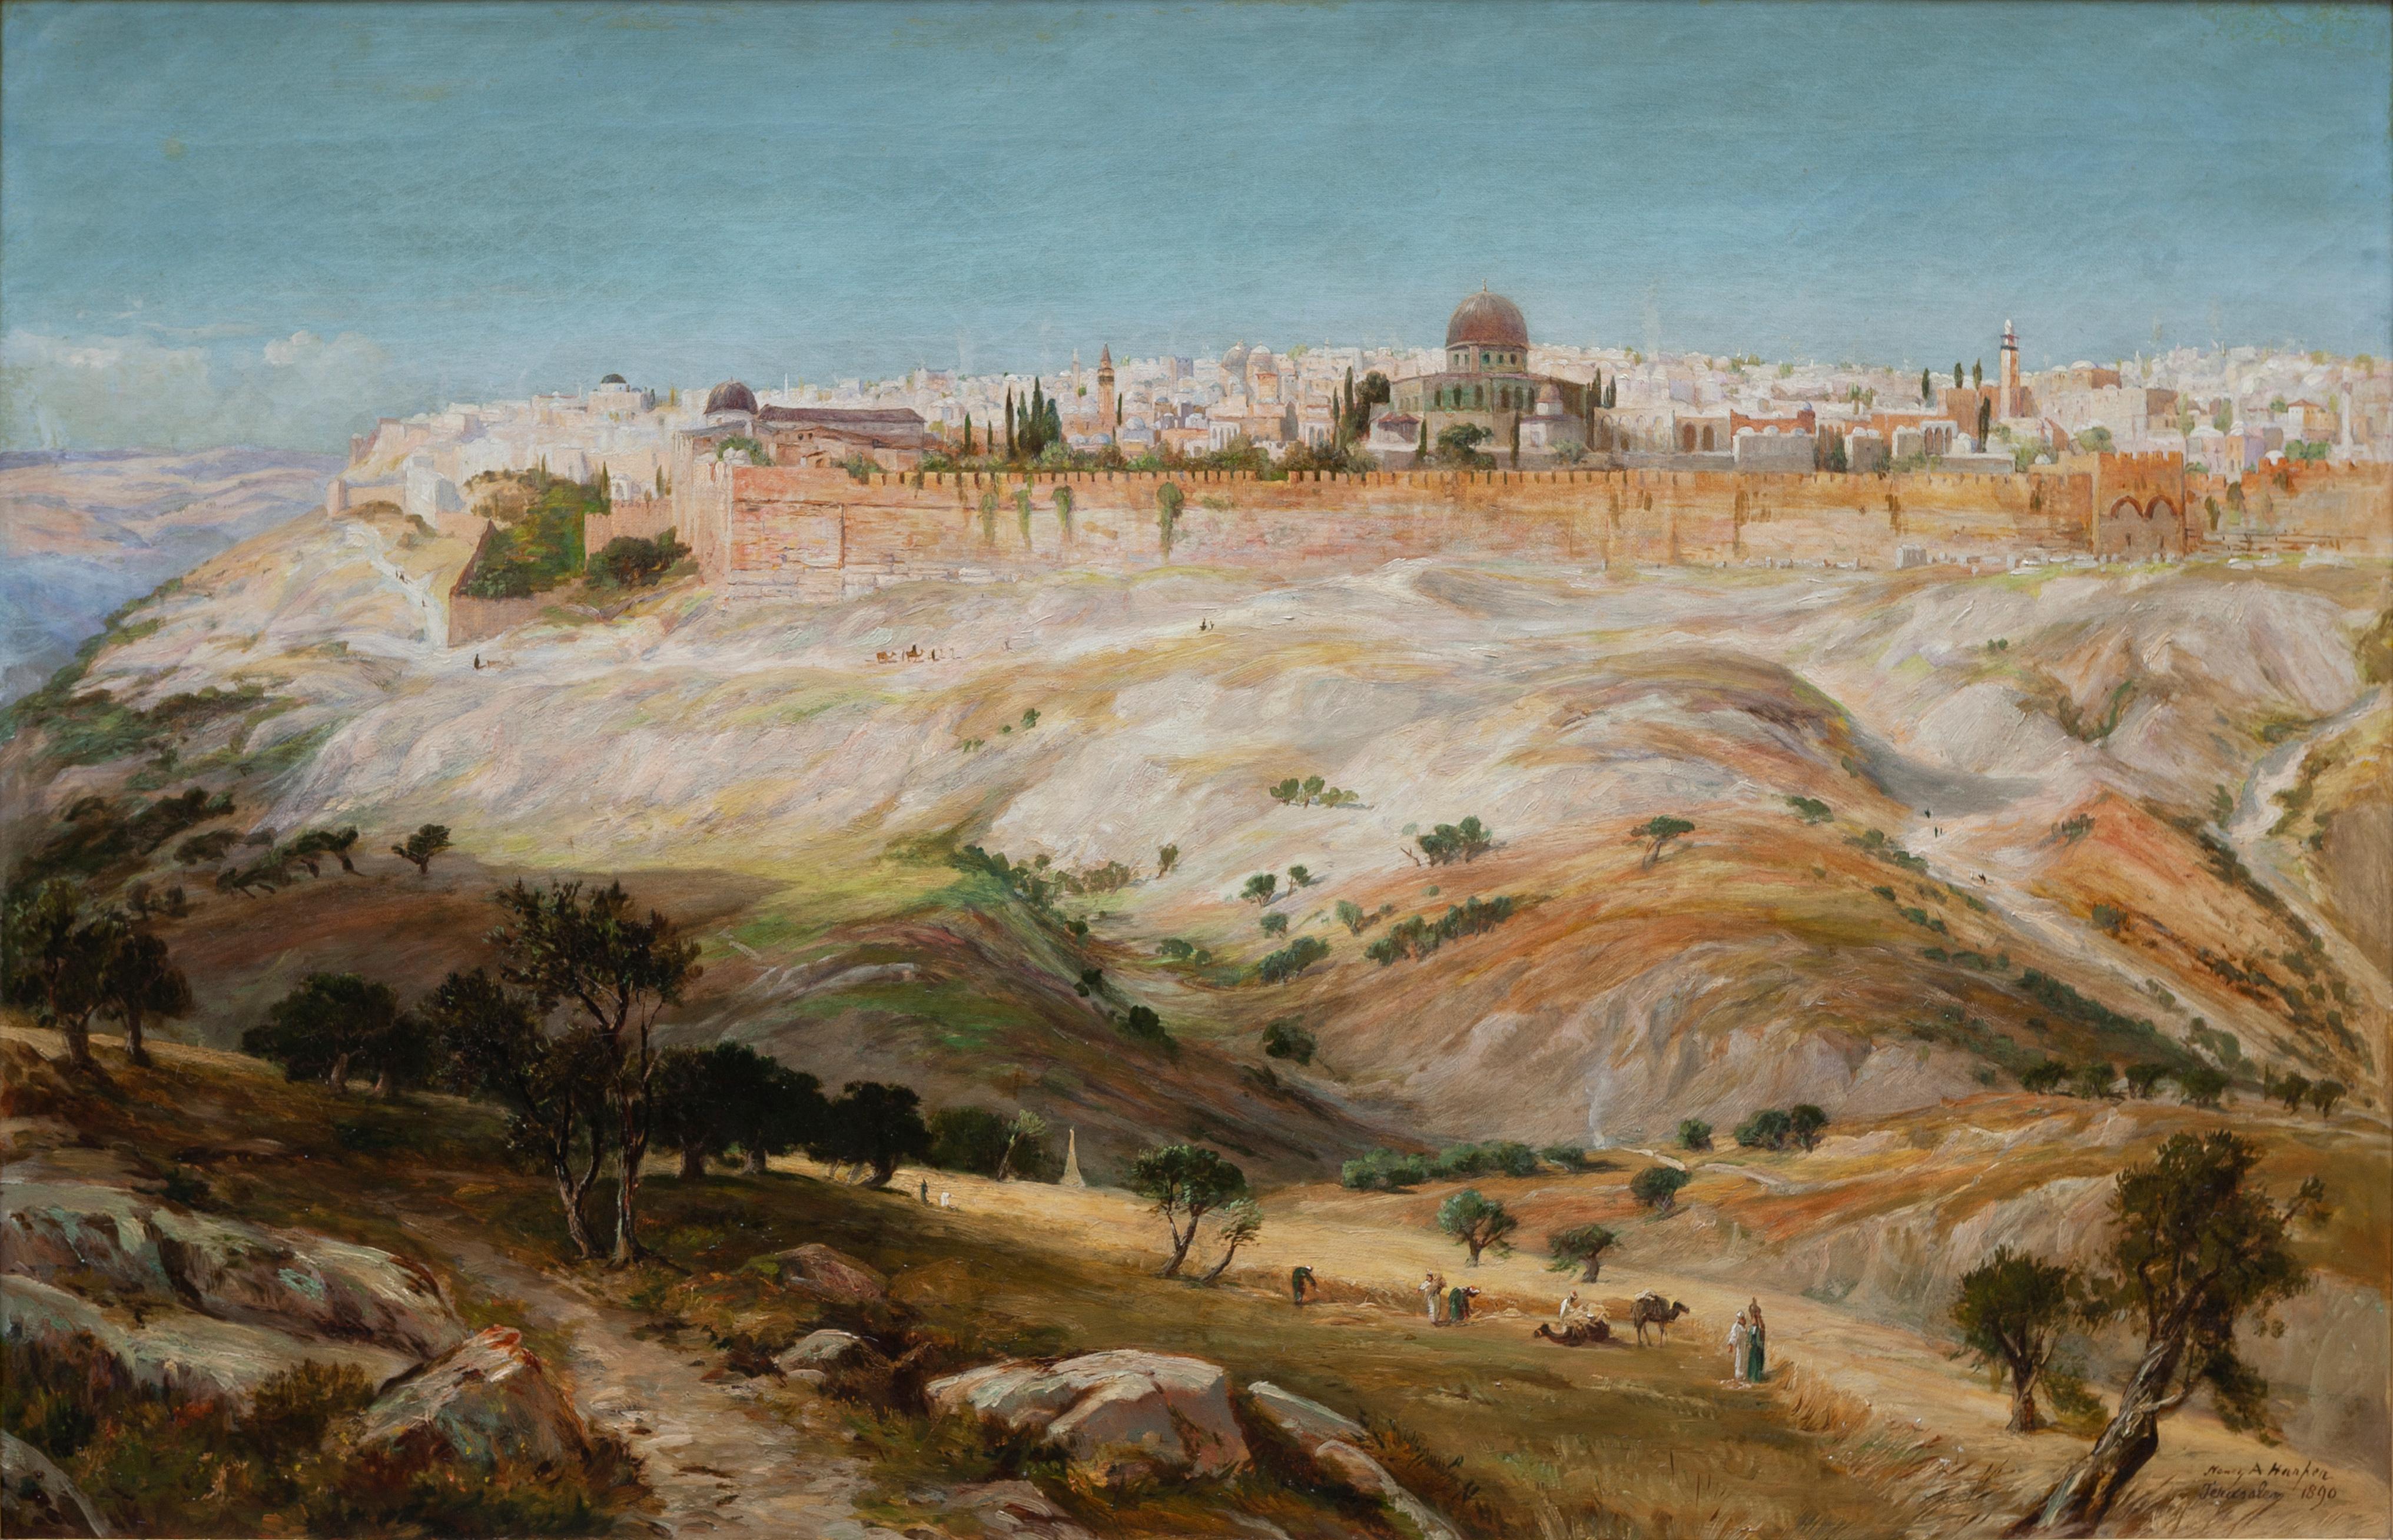 View of Jerusalem from the Mount of Olives, 1890 - Painting by Henry Andrew Harper (Blunham, 1835 - London, 1900)